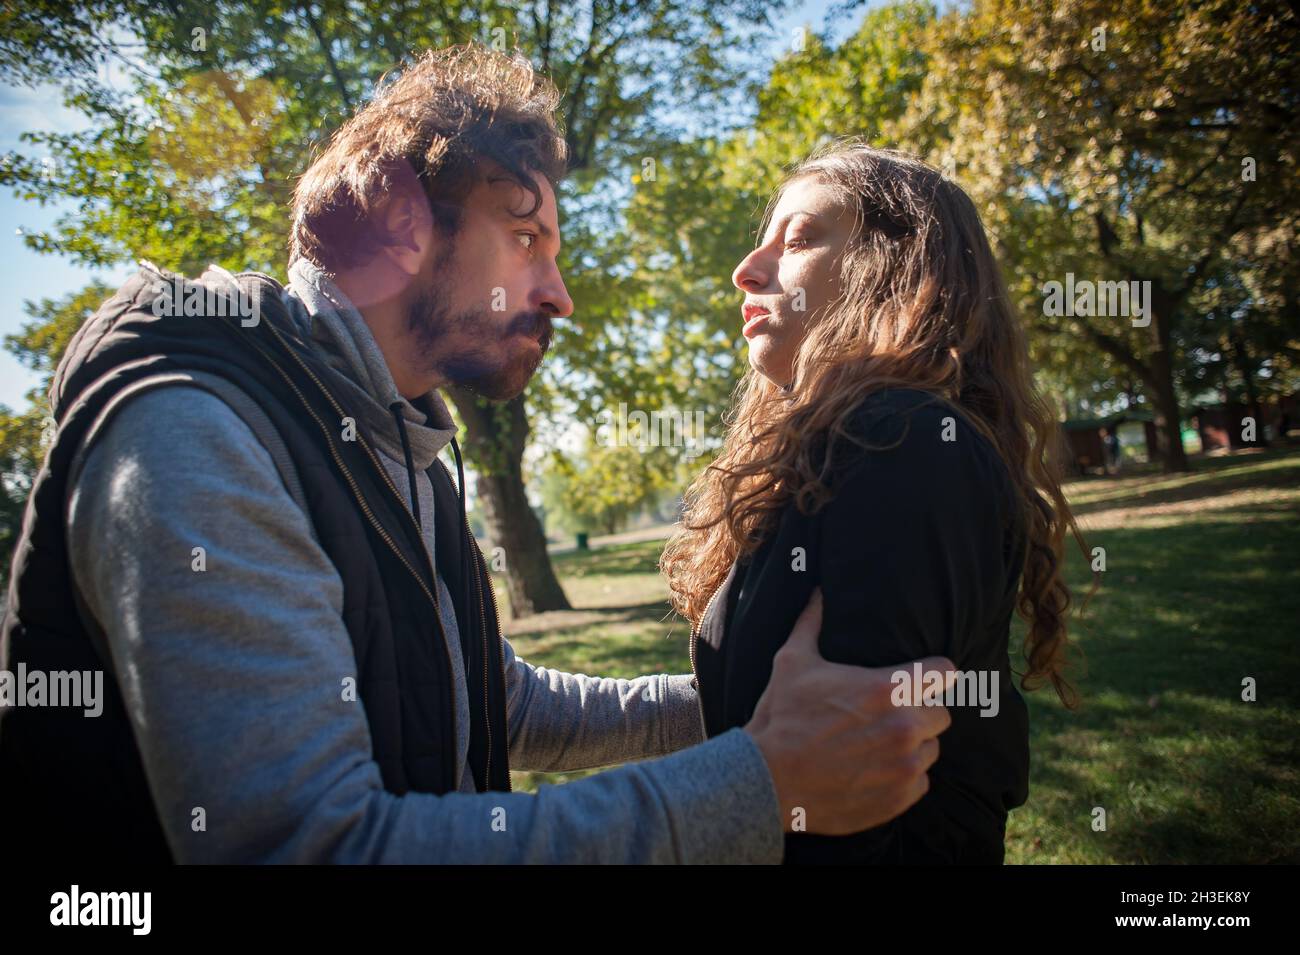 Bully and abuser, a jealous boyfriend abuses his girl girlfriend, verbally and physically threatens, yells at her and scares her, outdoor in public pa Stock Photo